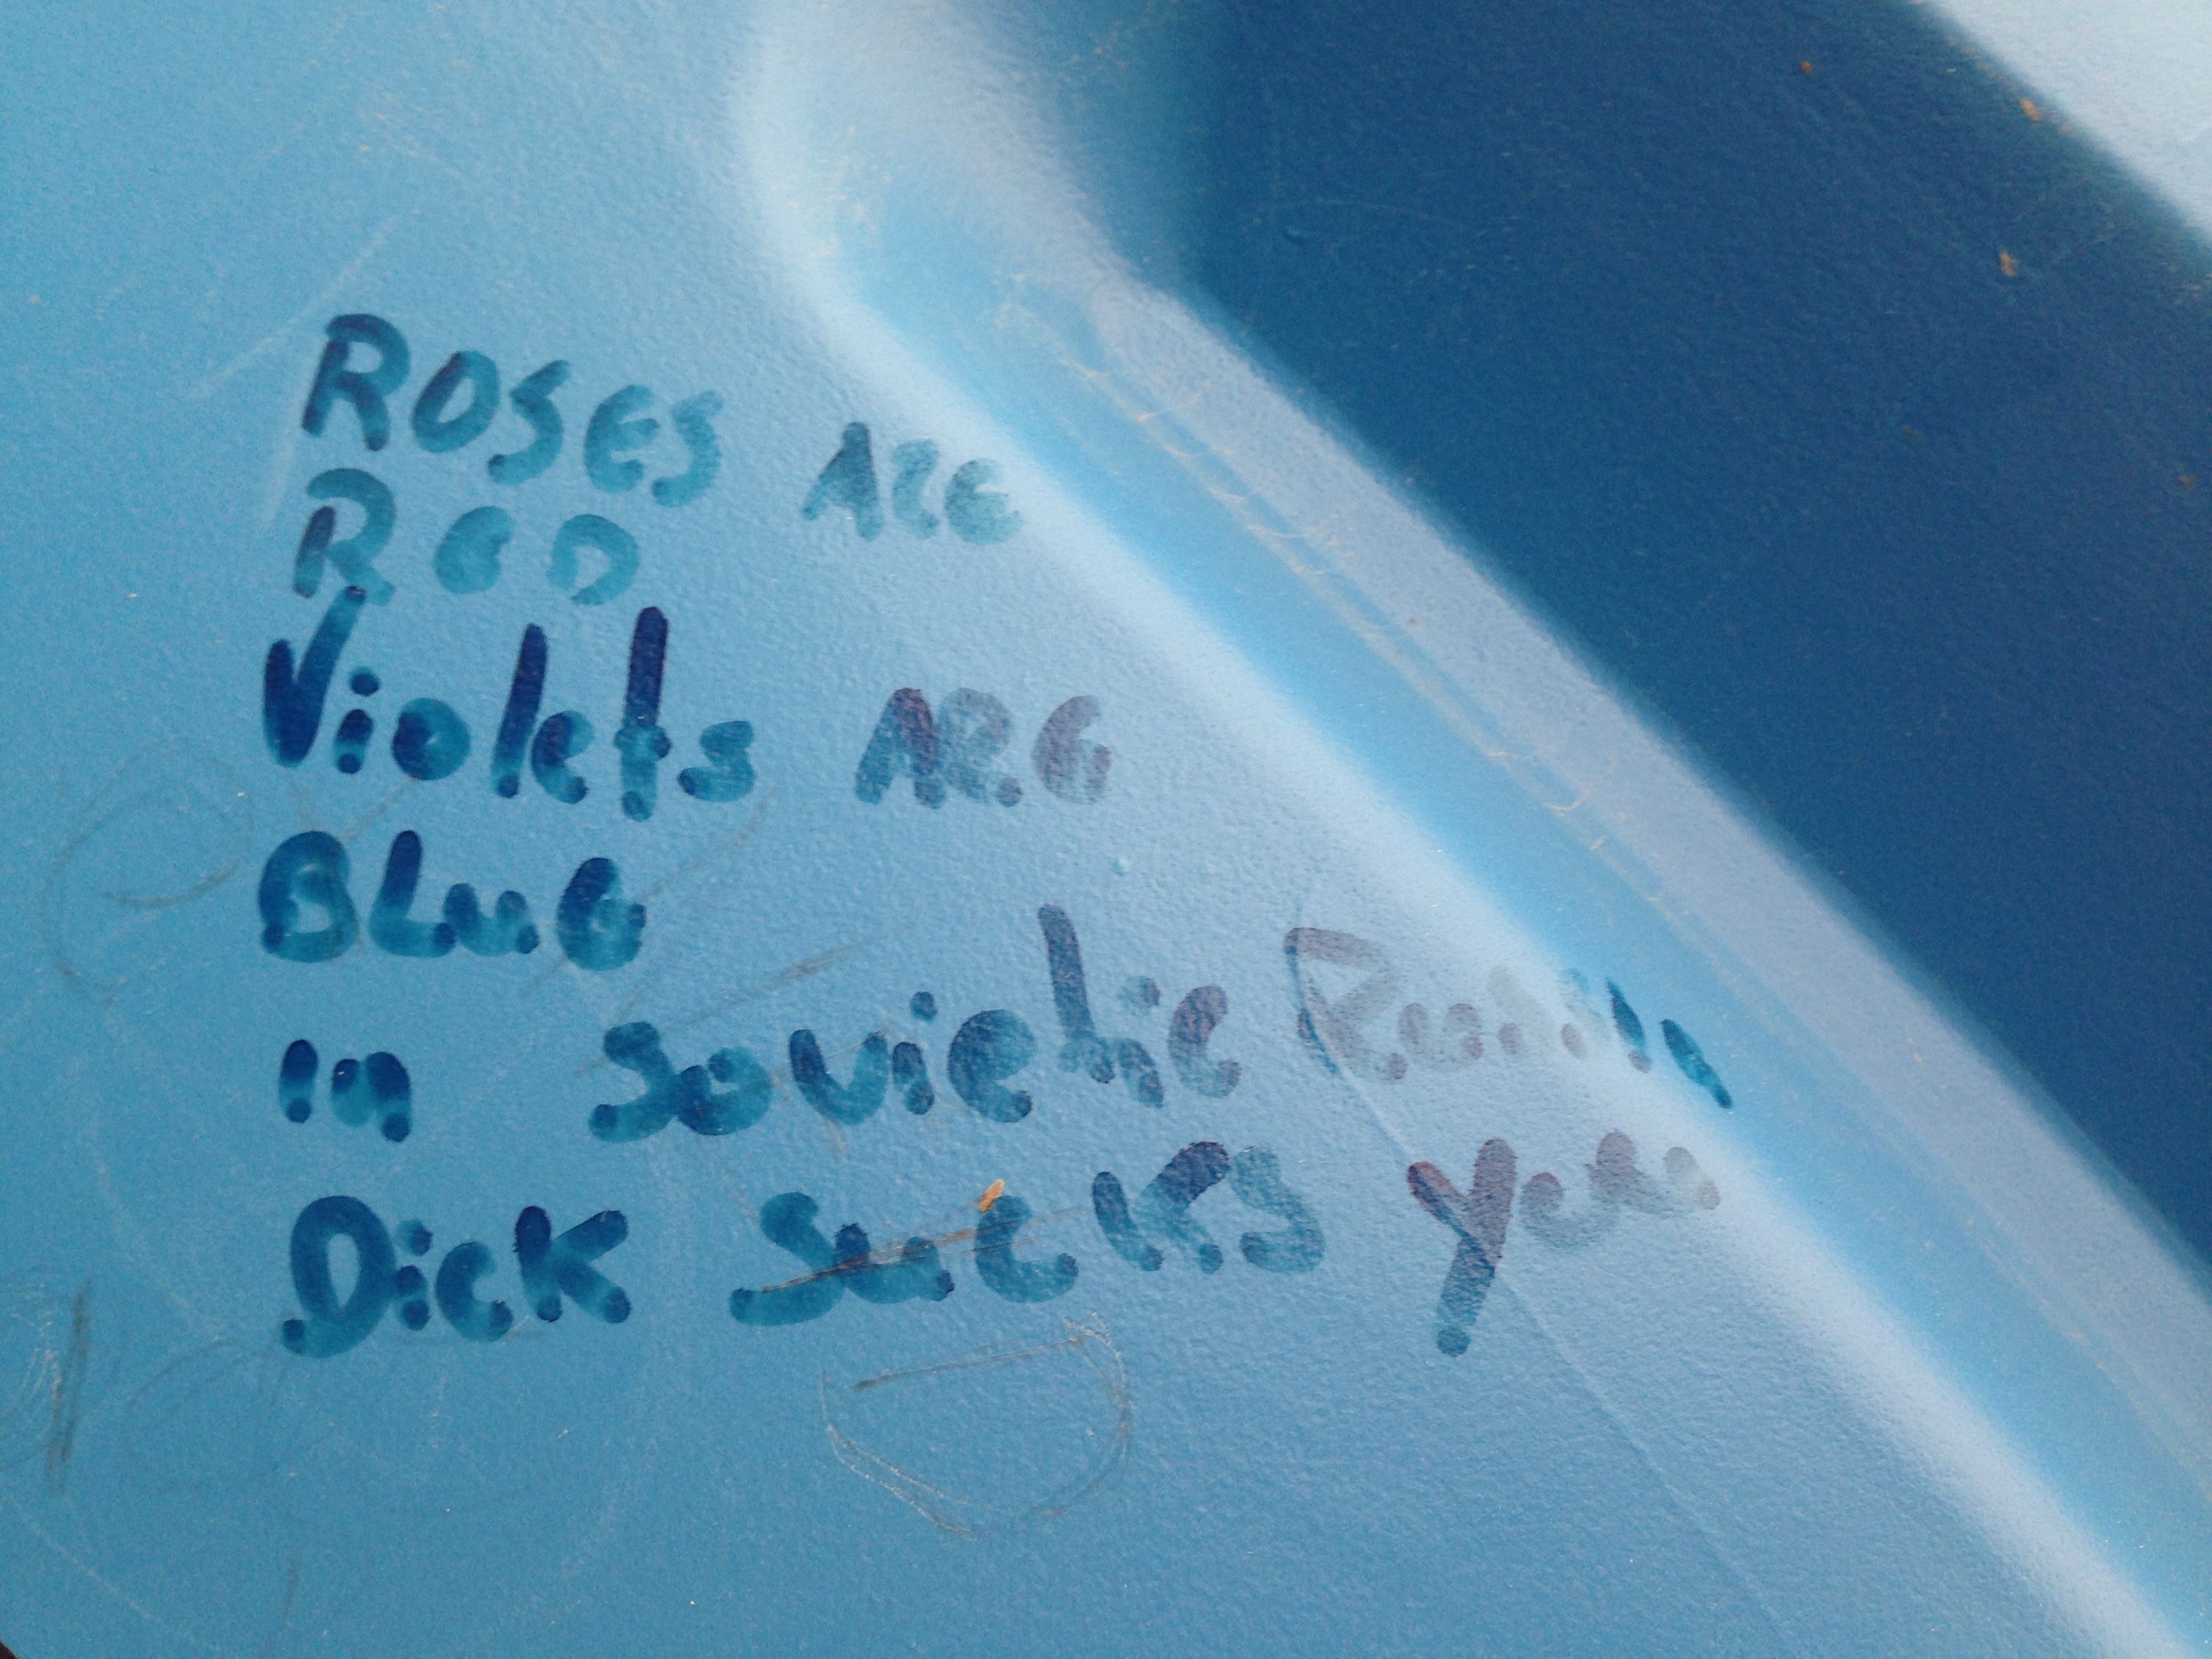 Poetry on the shitters